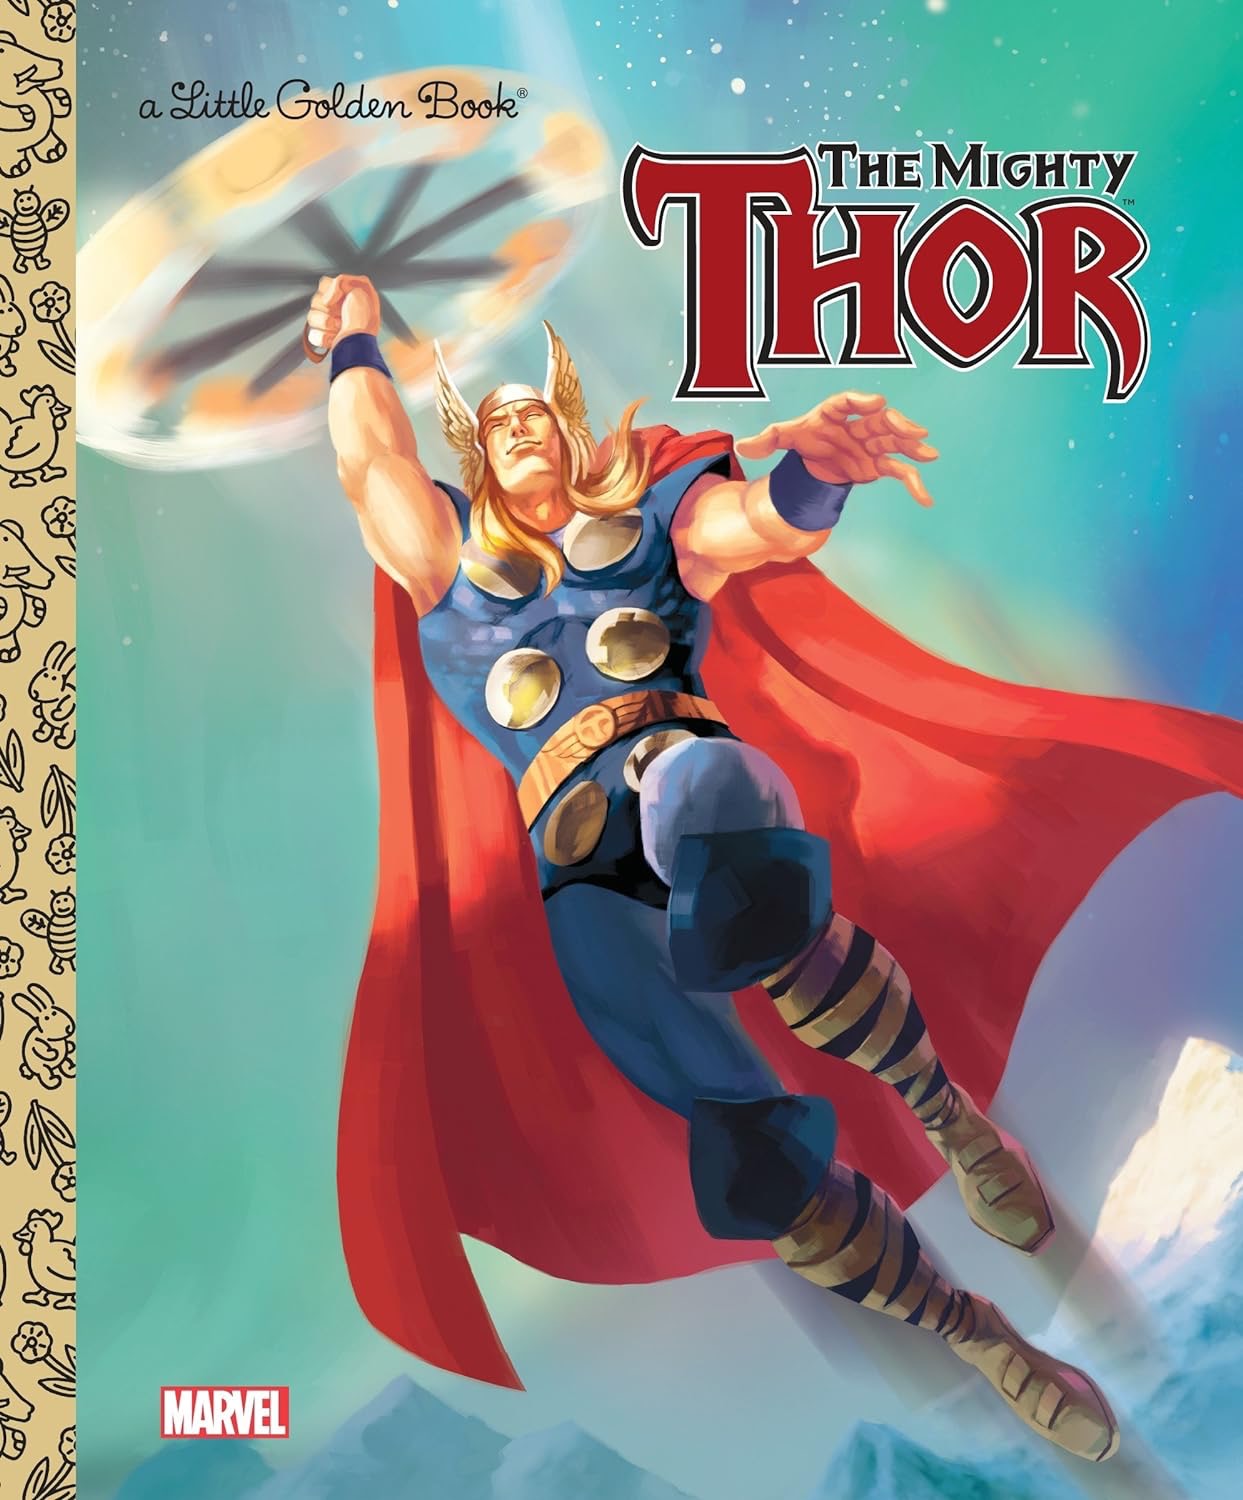 "The Mighty Thor" Little Golden Book